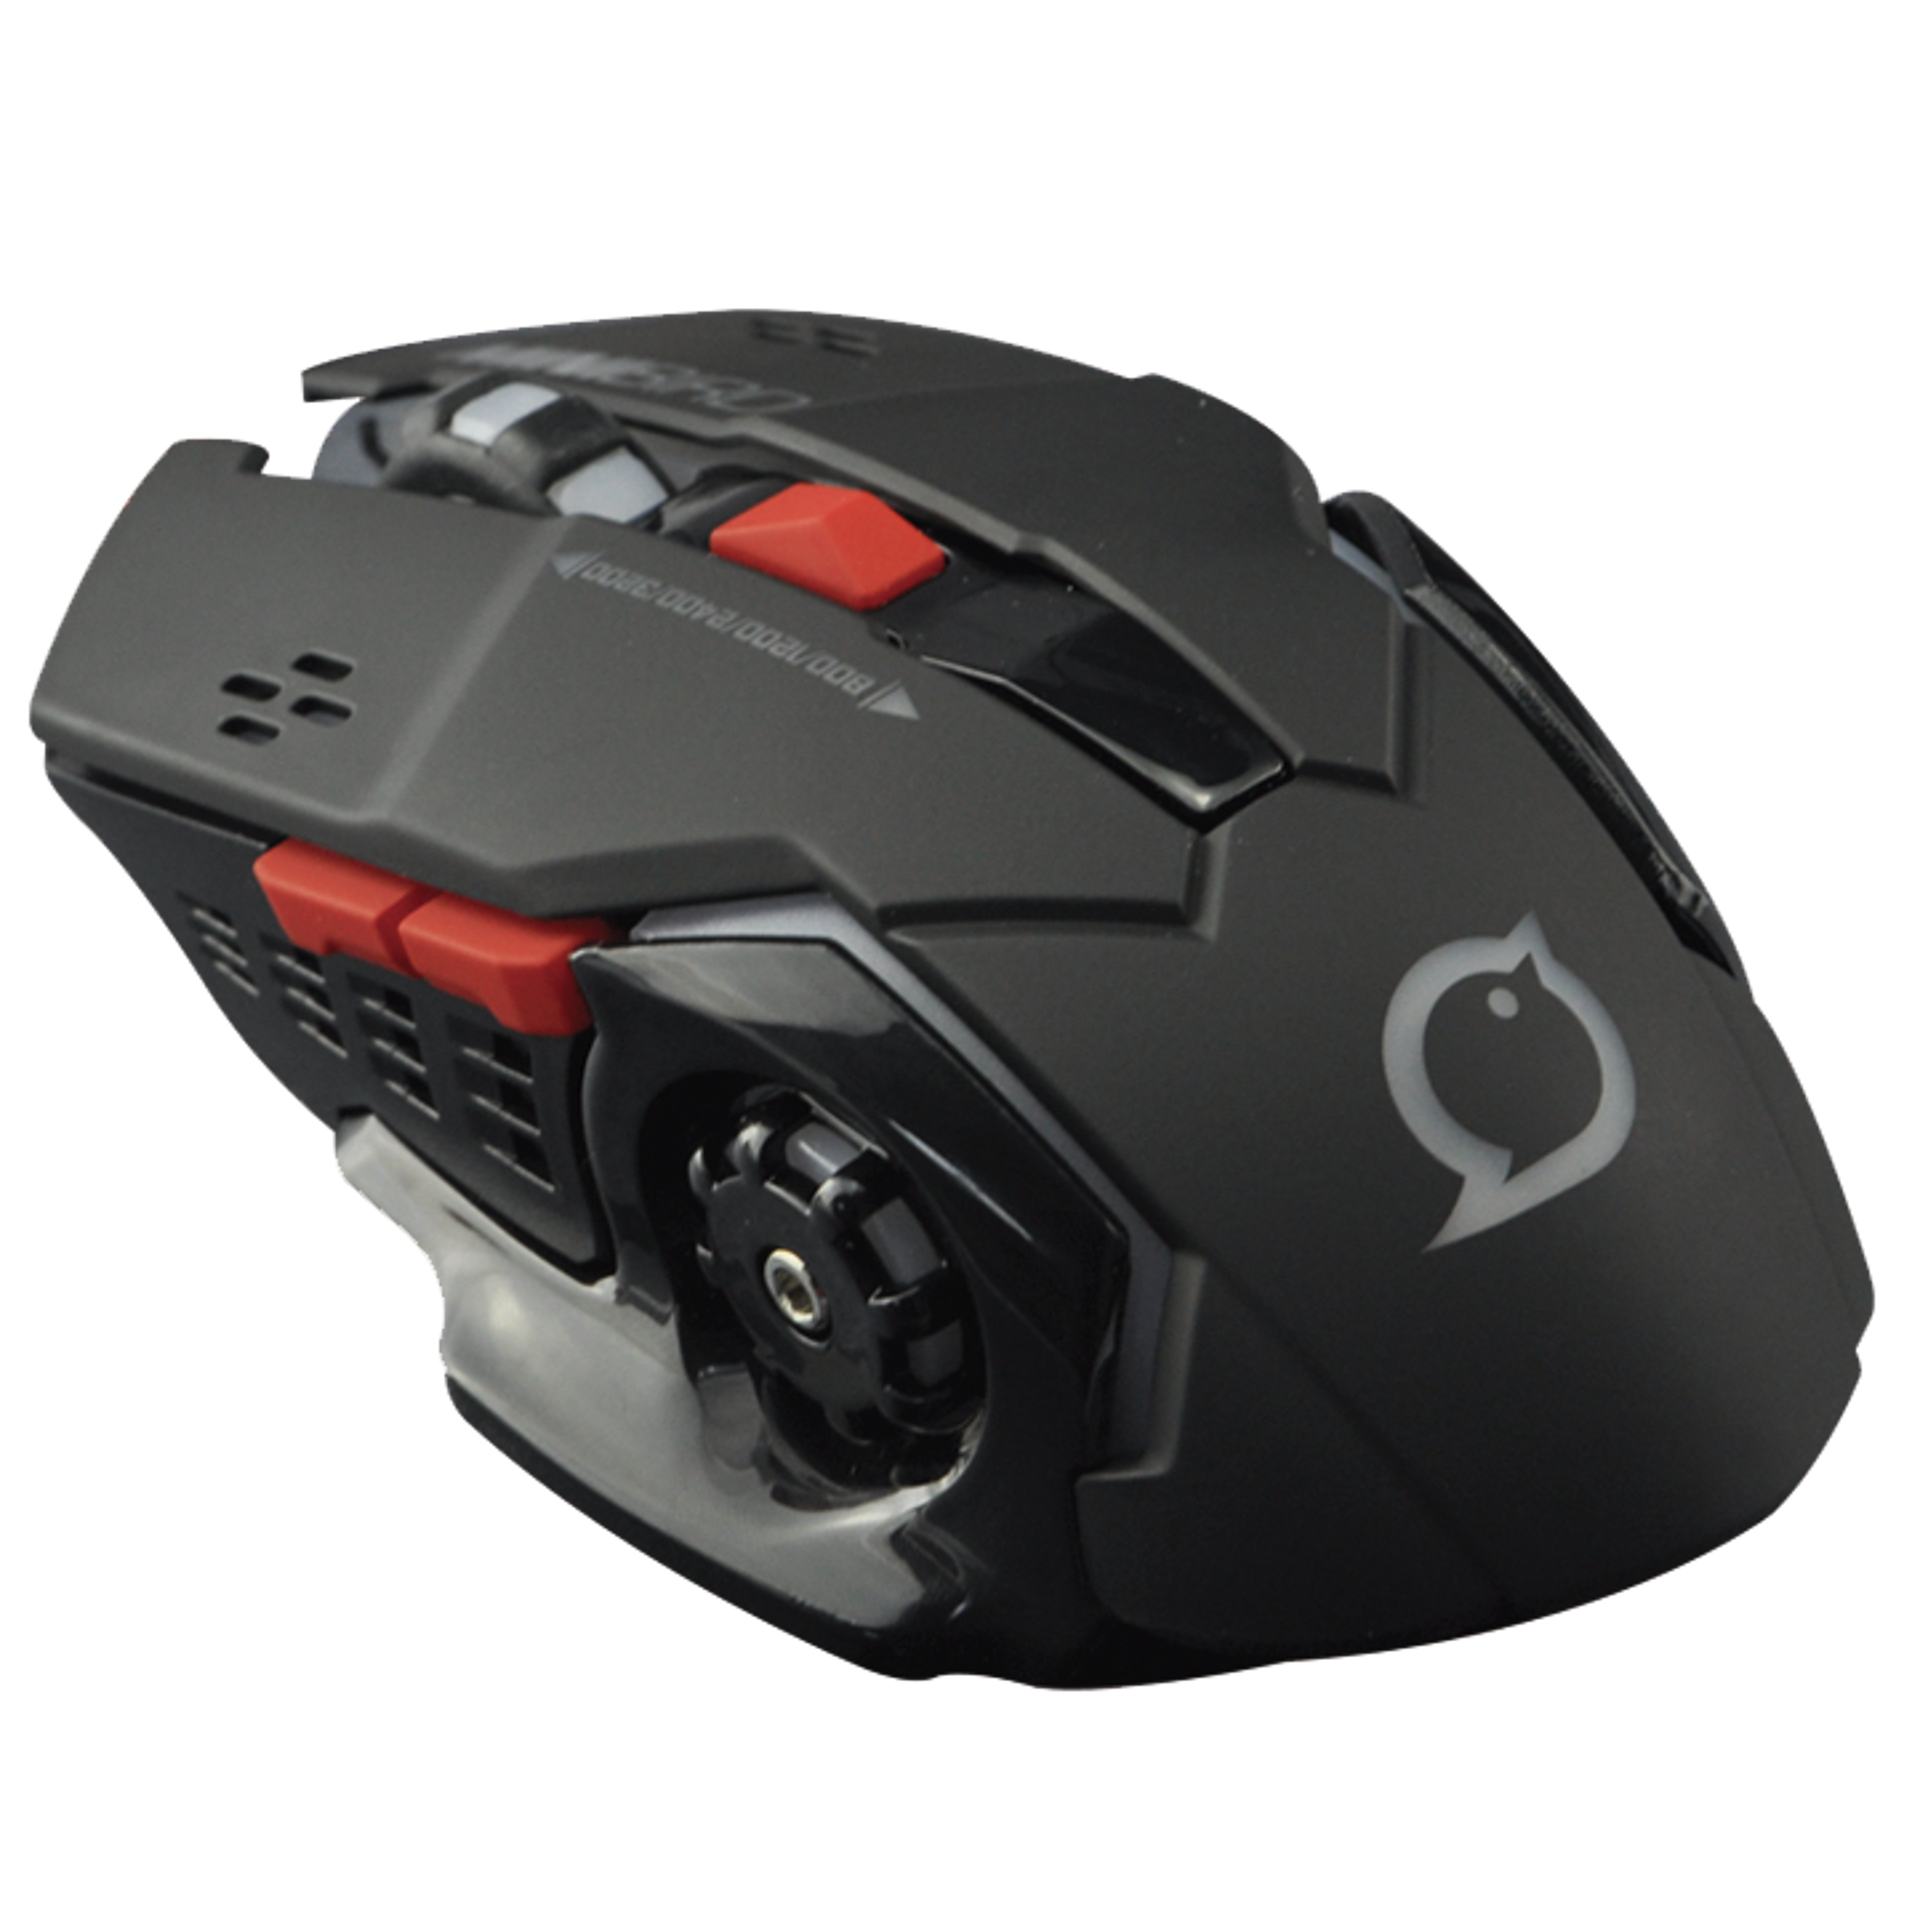 MiniBird Tyrant Gaming Mouse